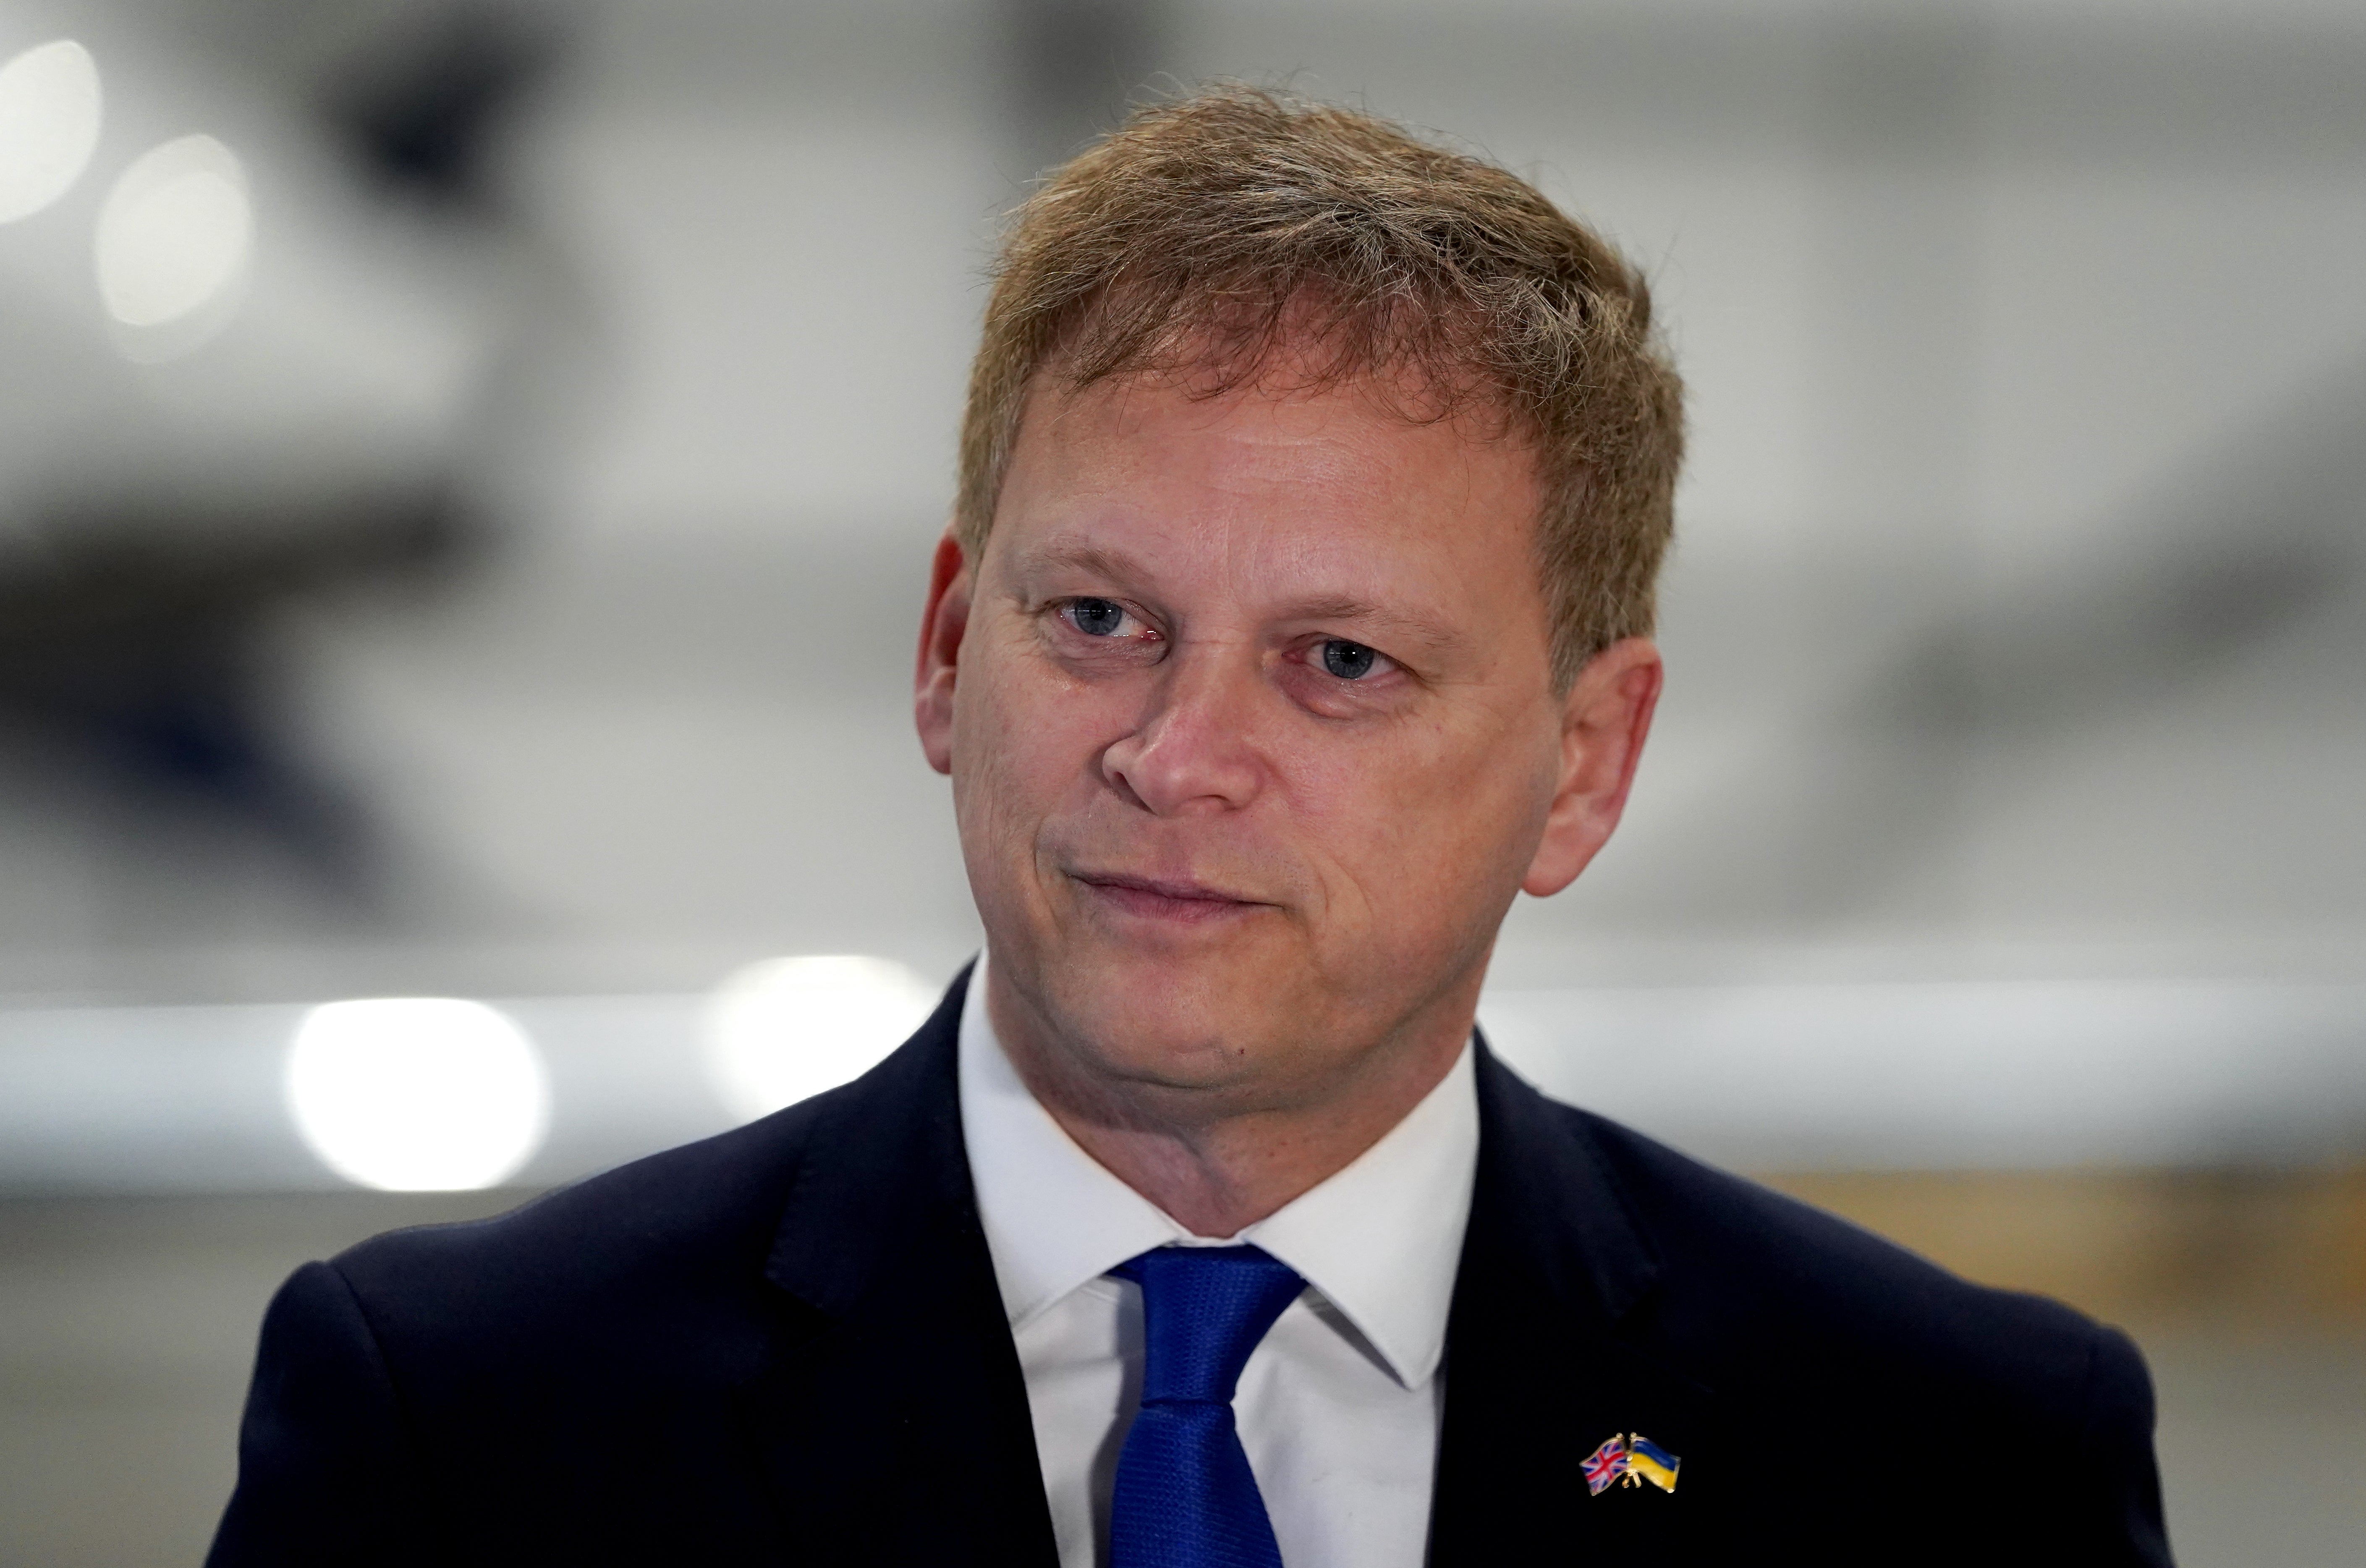 Transport Secretary Grant Shapps said workforce reform was required (Gareth Fuller/PA)